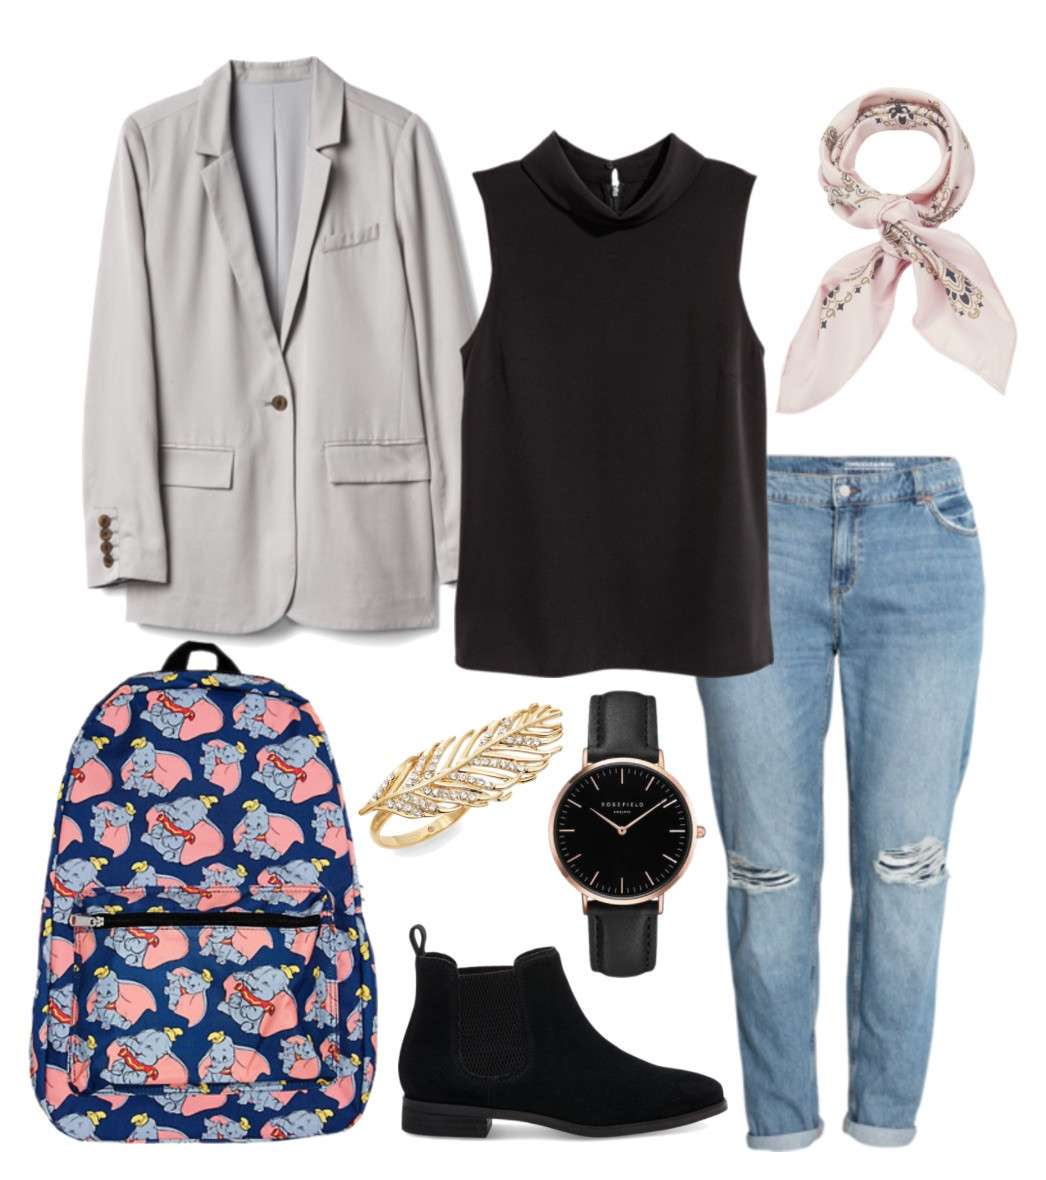 Back To School Outfits
 4 Fall Trends You Should Try in Your Back to School Outfits